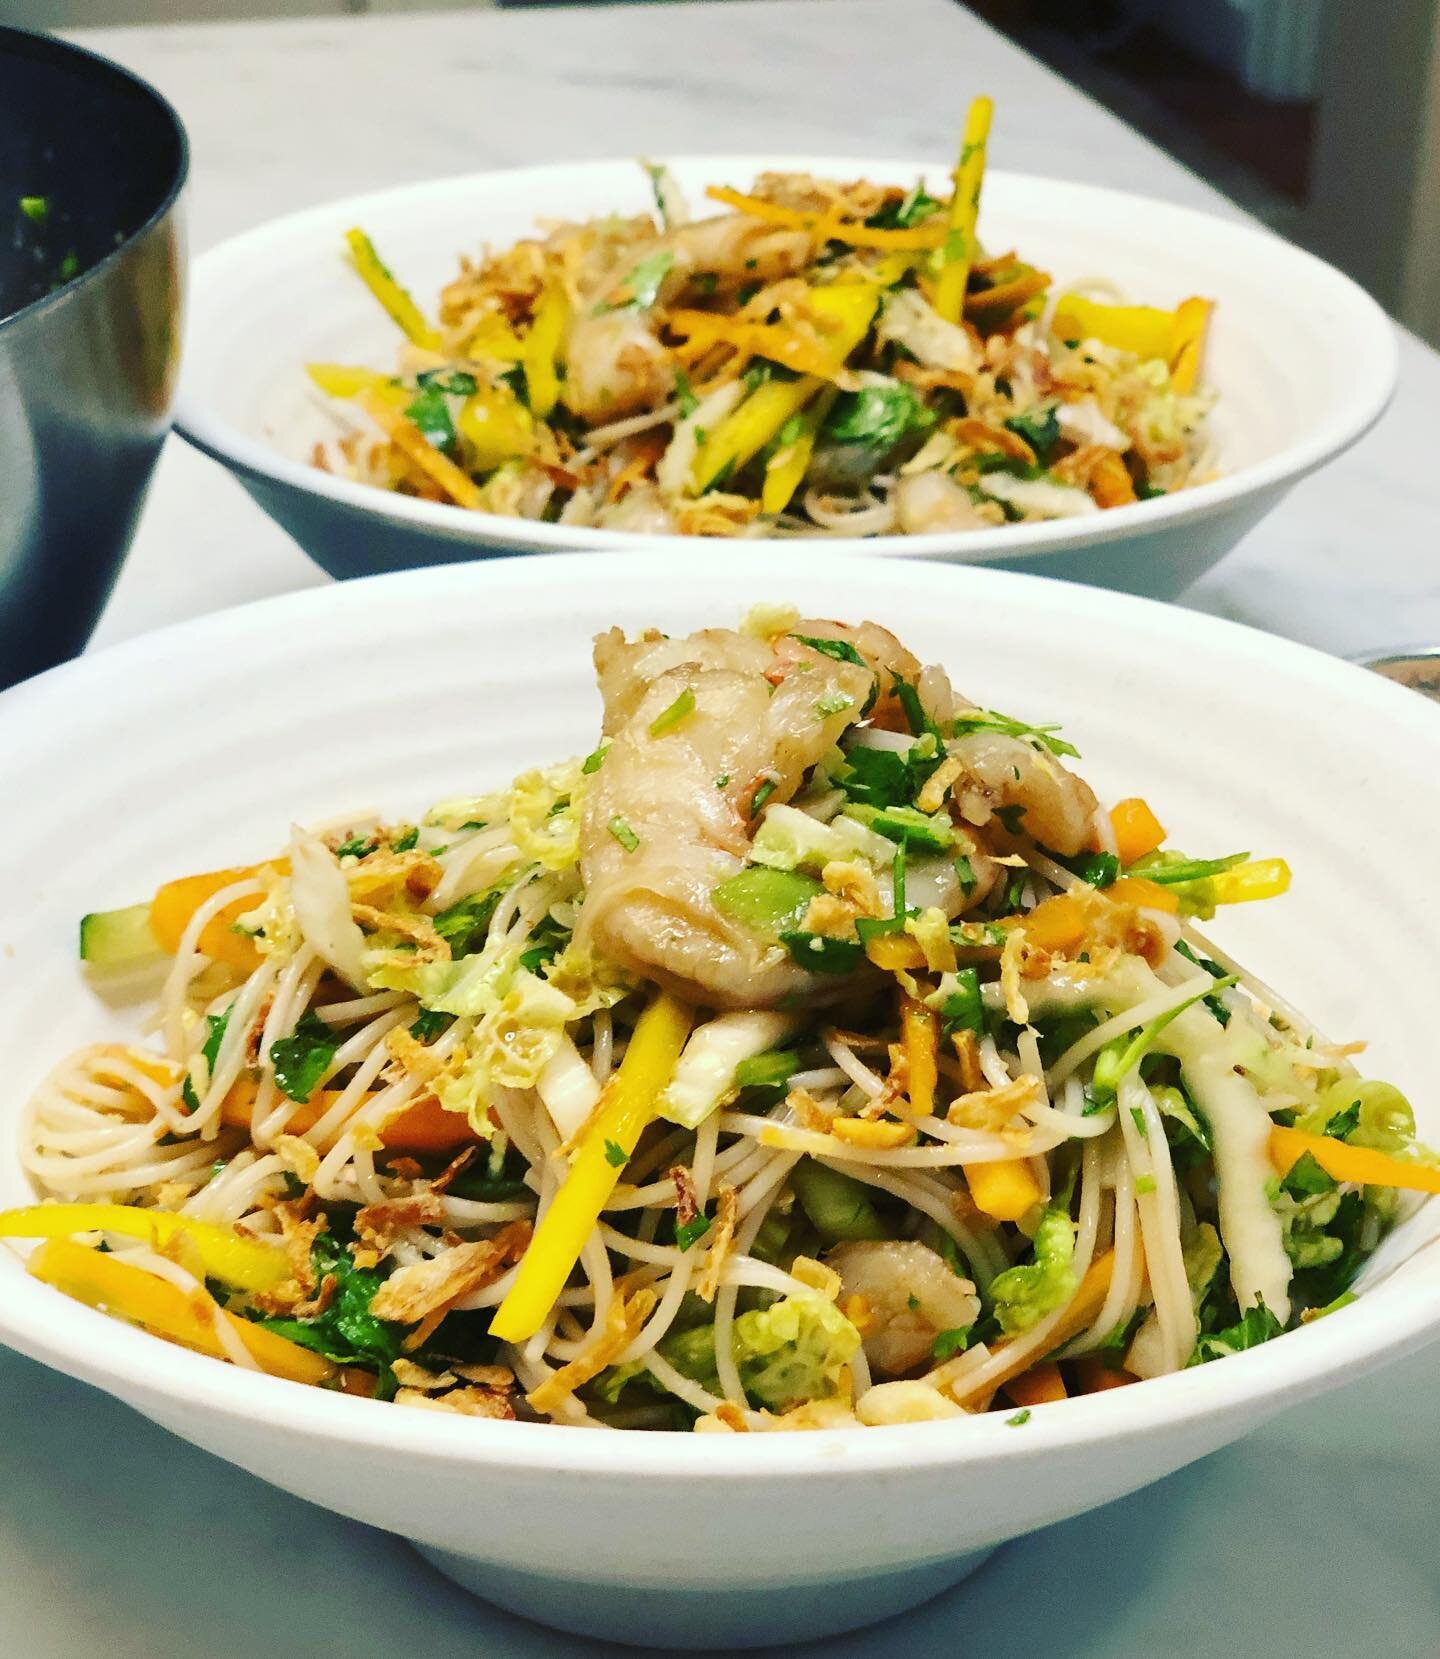 Creative farm-share cookery.  This refreshing shrimp vermicelli noodle salad with crispy shallots was just the dish to cook through my farm share haul: napa cabbage, carrot, cucumber, scallion, yellow pepper, cilantro and mint. Mix it all with rice v